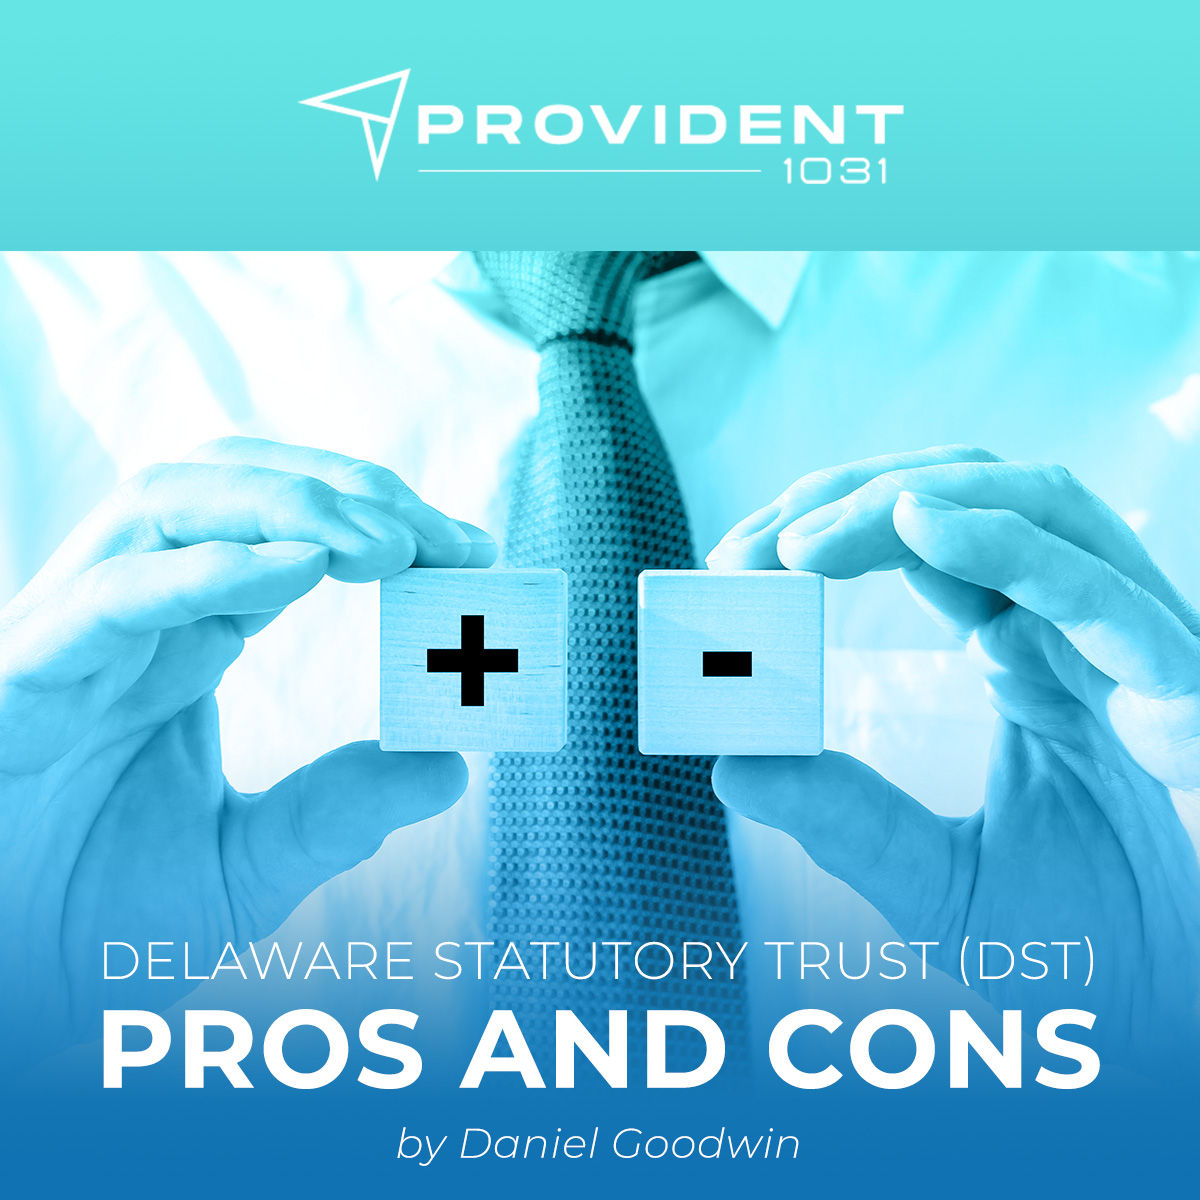 Delaware Statutory Trust - DST - Pros and Cons - by Daniel Goodwin